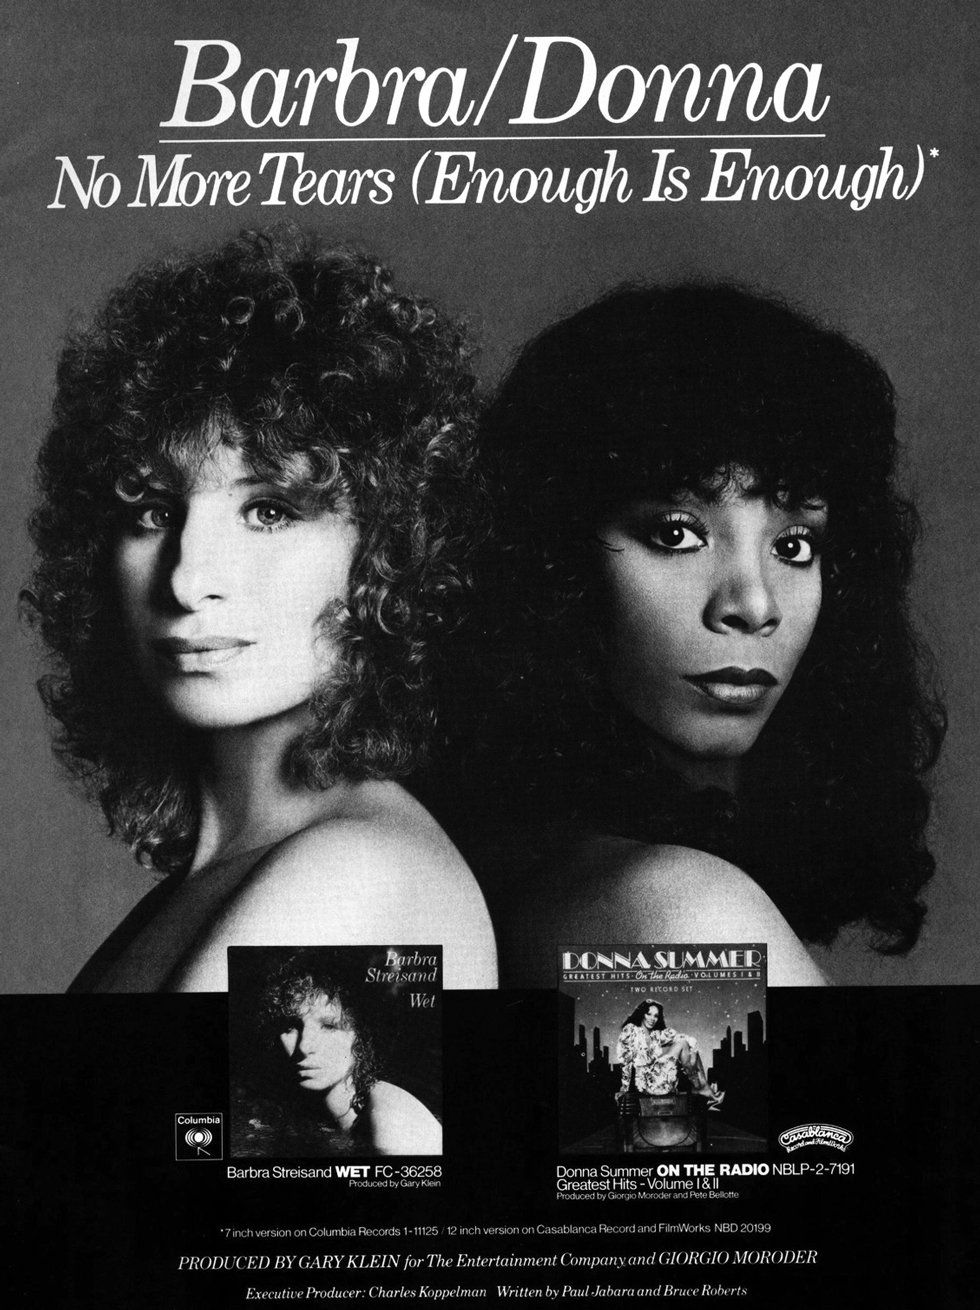 Columbia Records ad for Enough is Enough